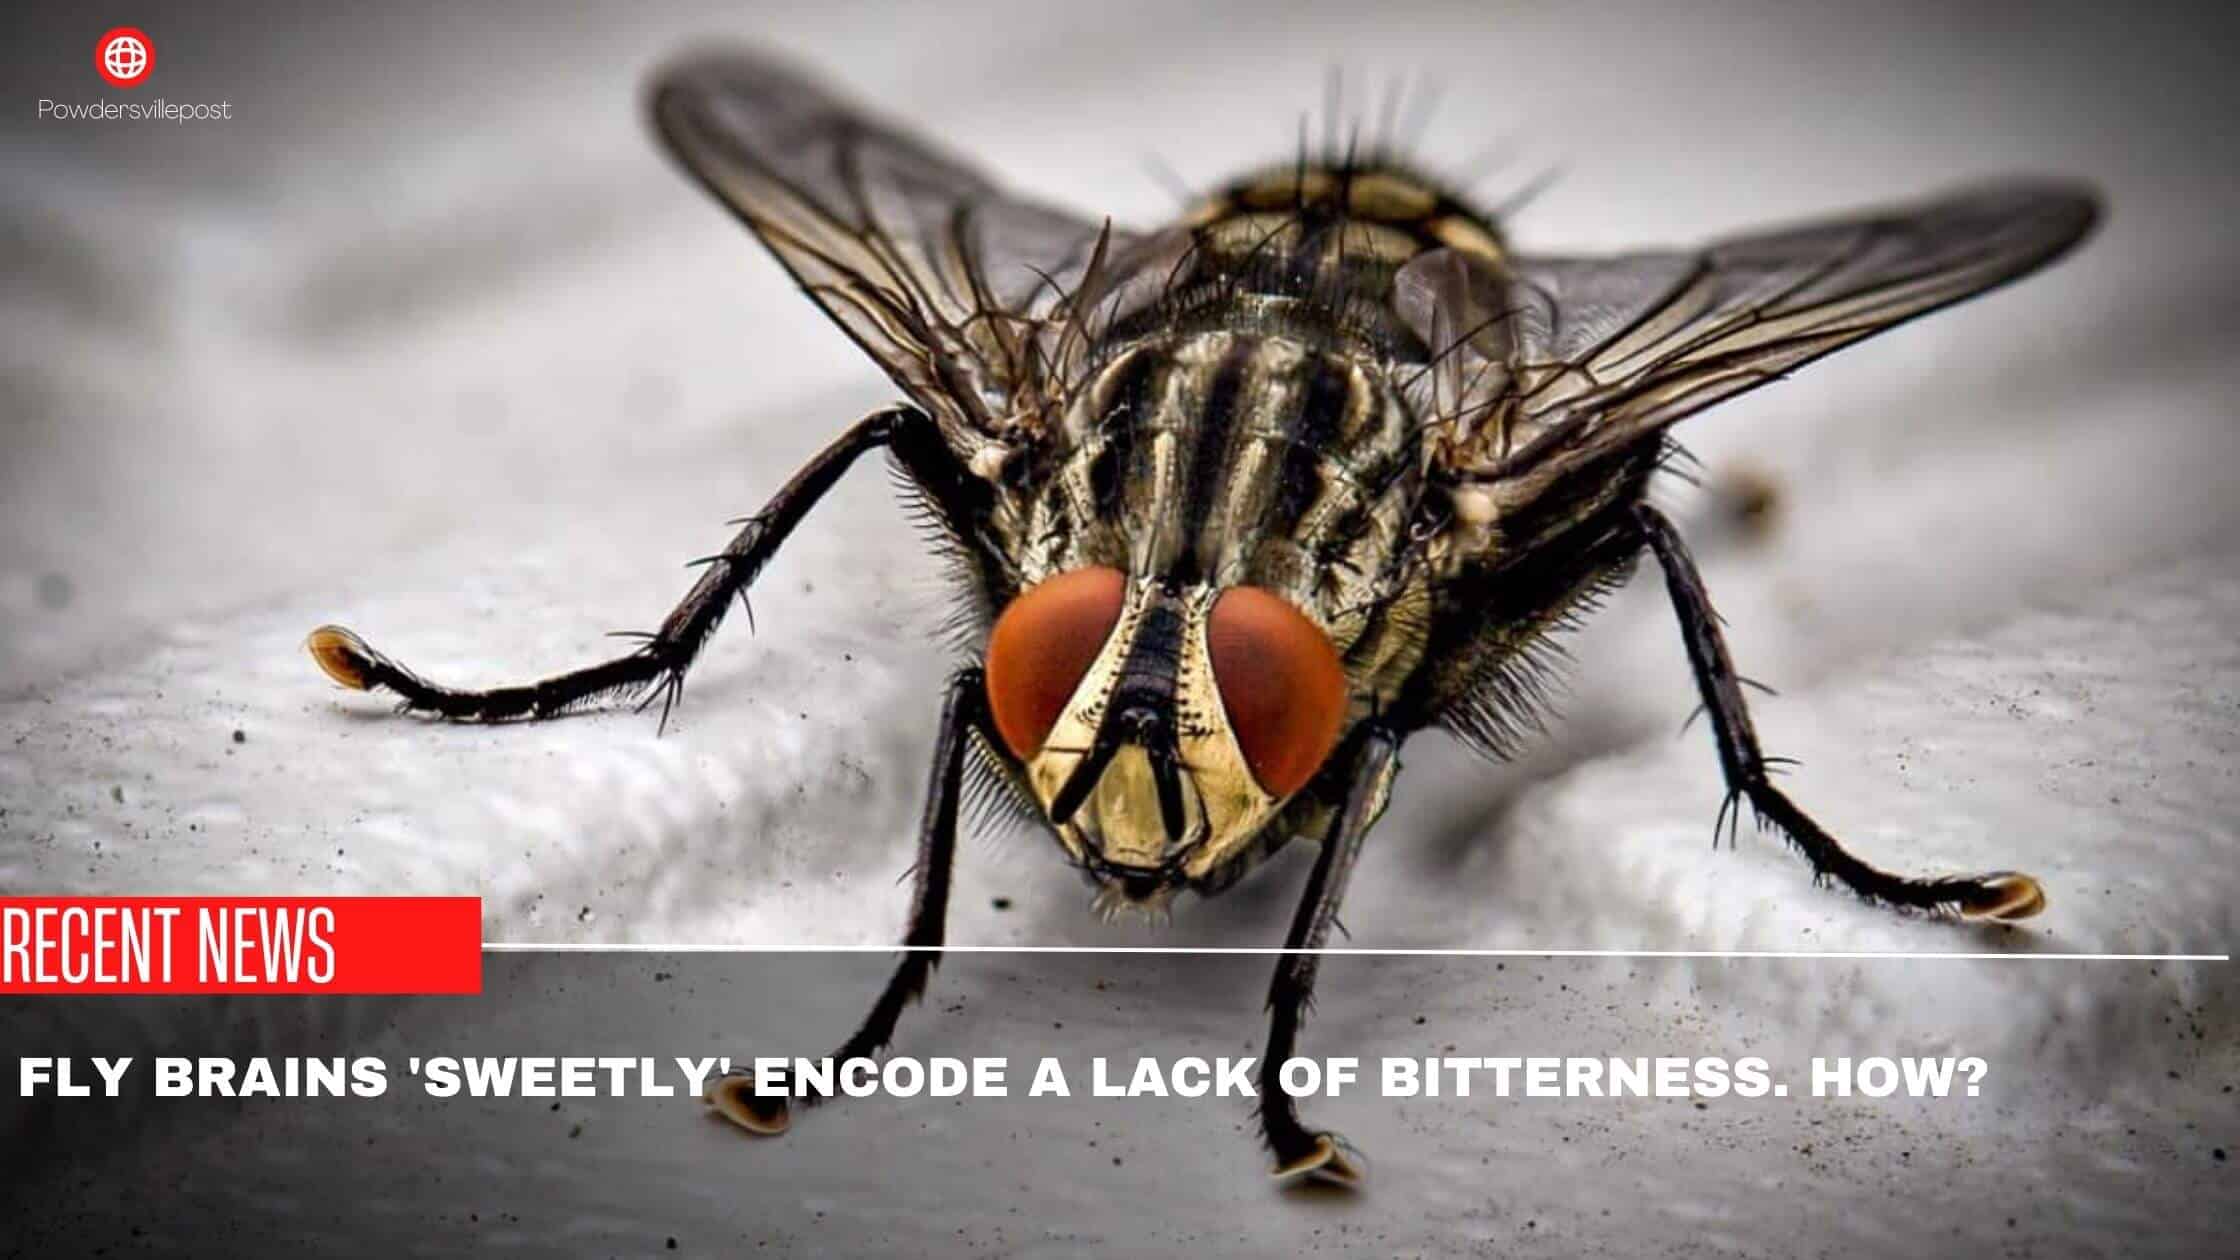 Fly Brains 'Sweetly' Encode A Lack Of Bitterness. How